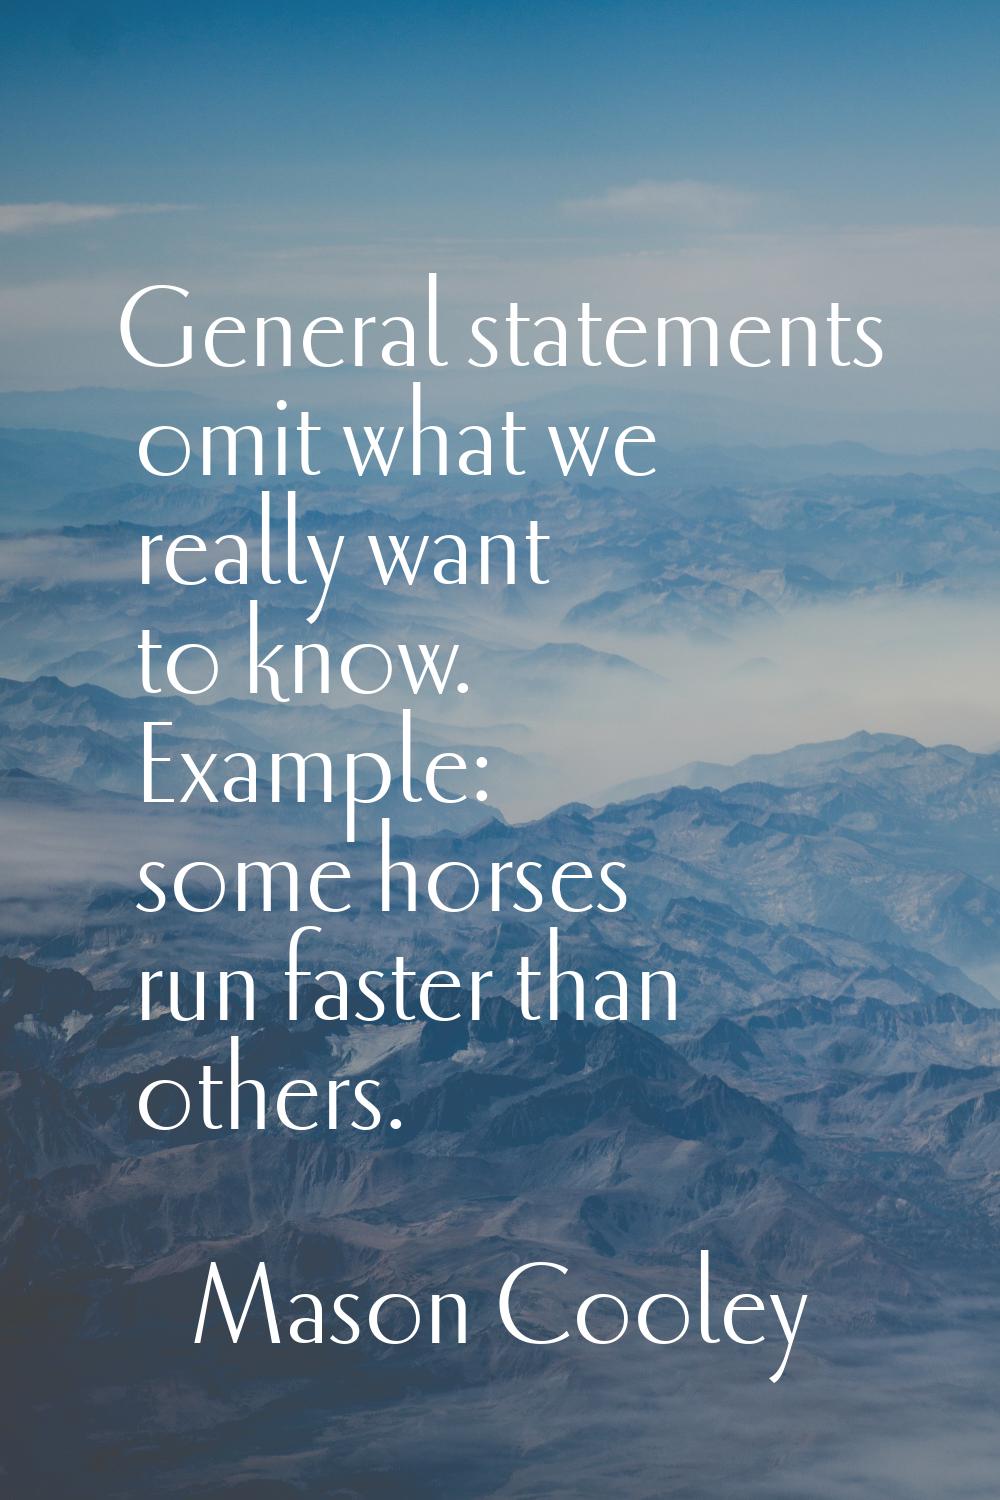 General statements omit what we really want to know. Example: some horses run faster than others.